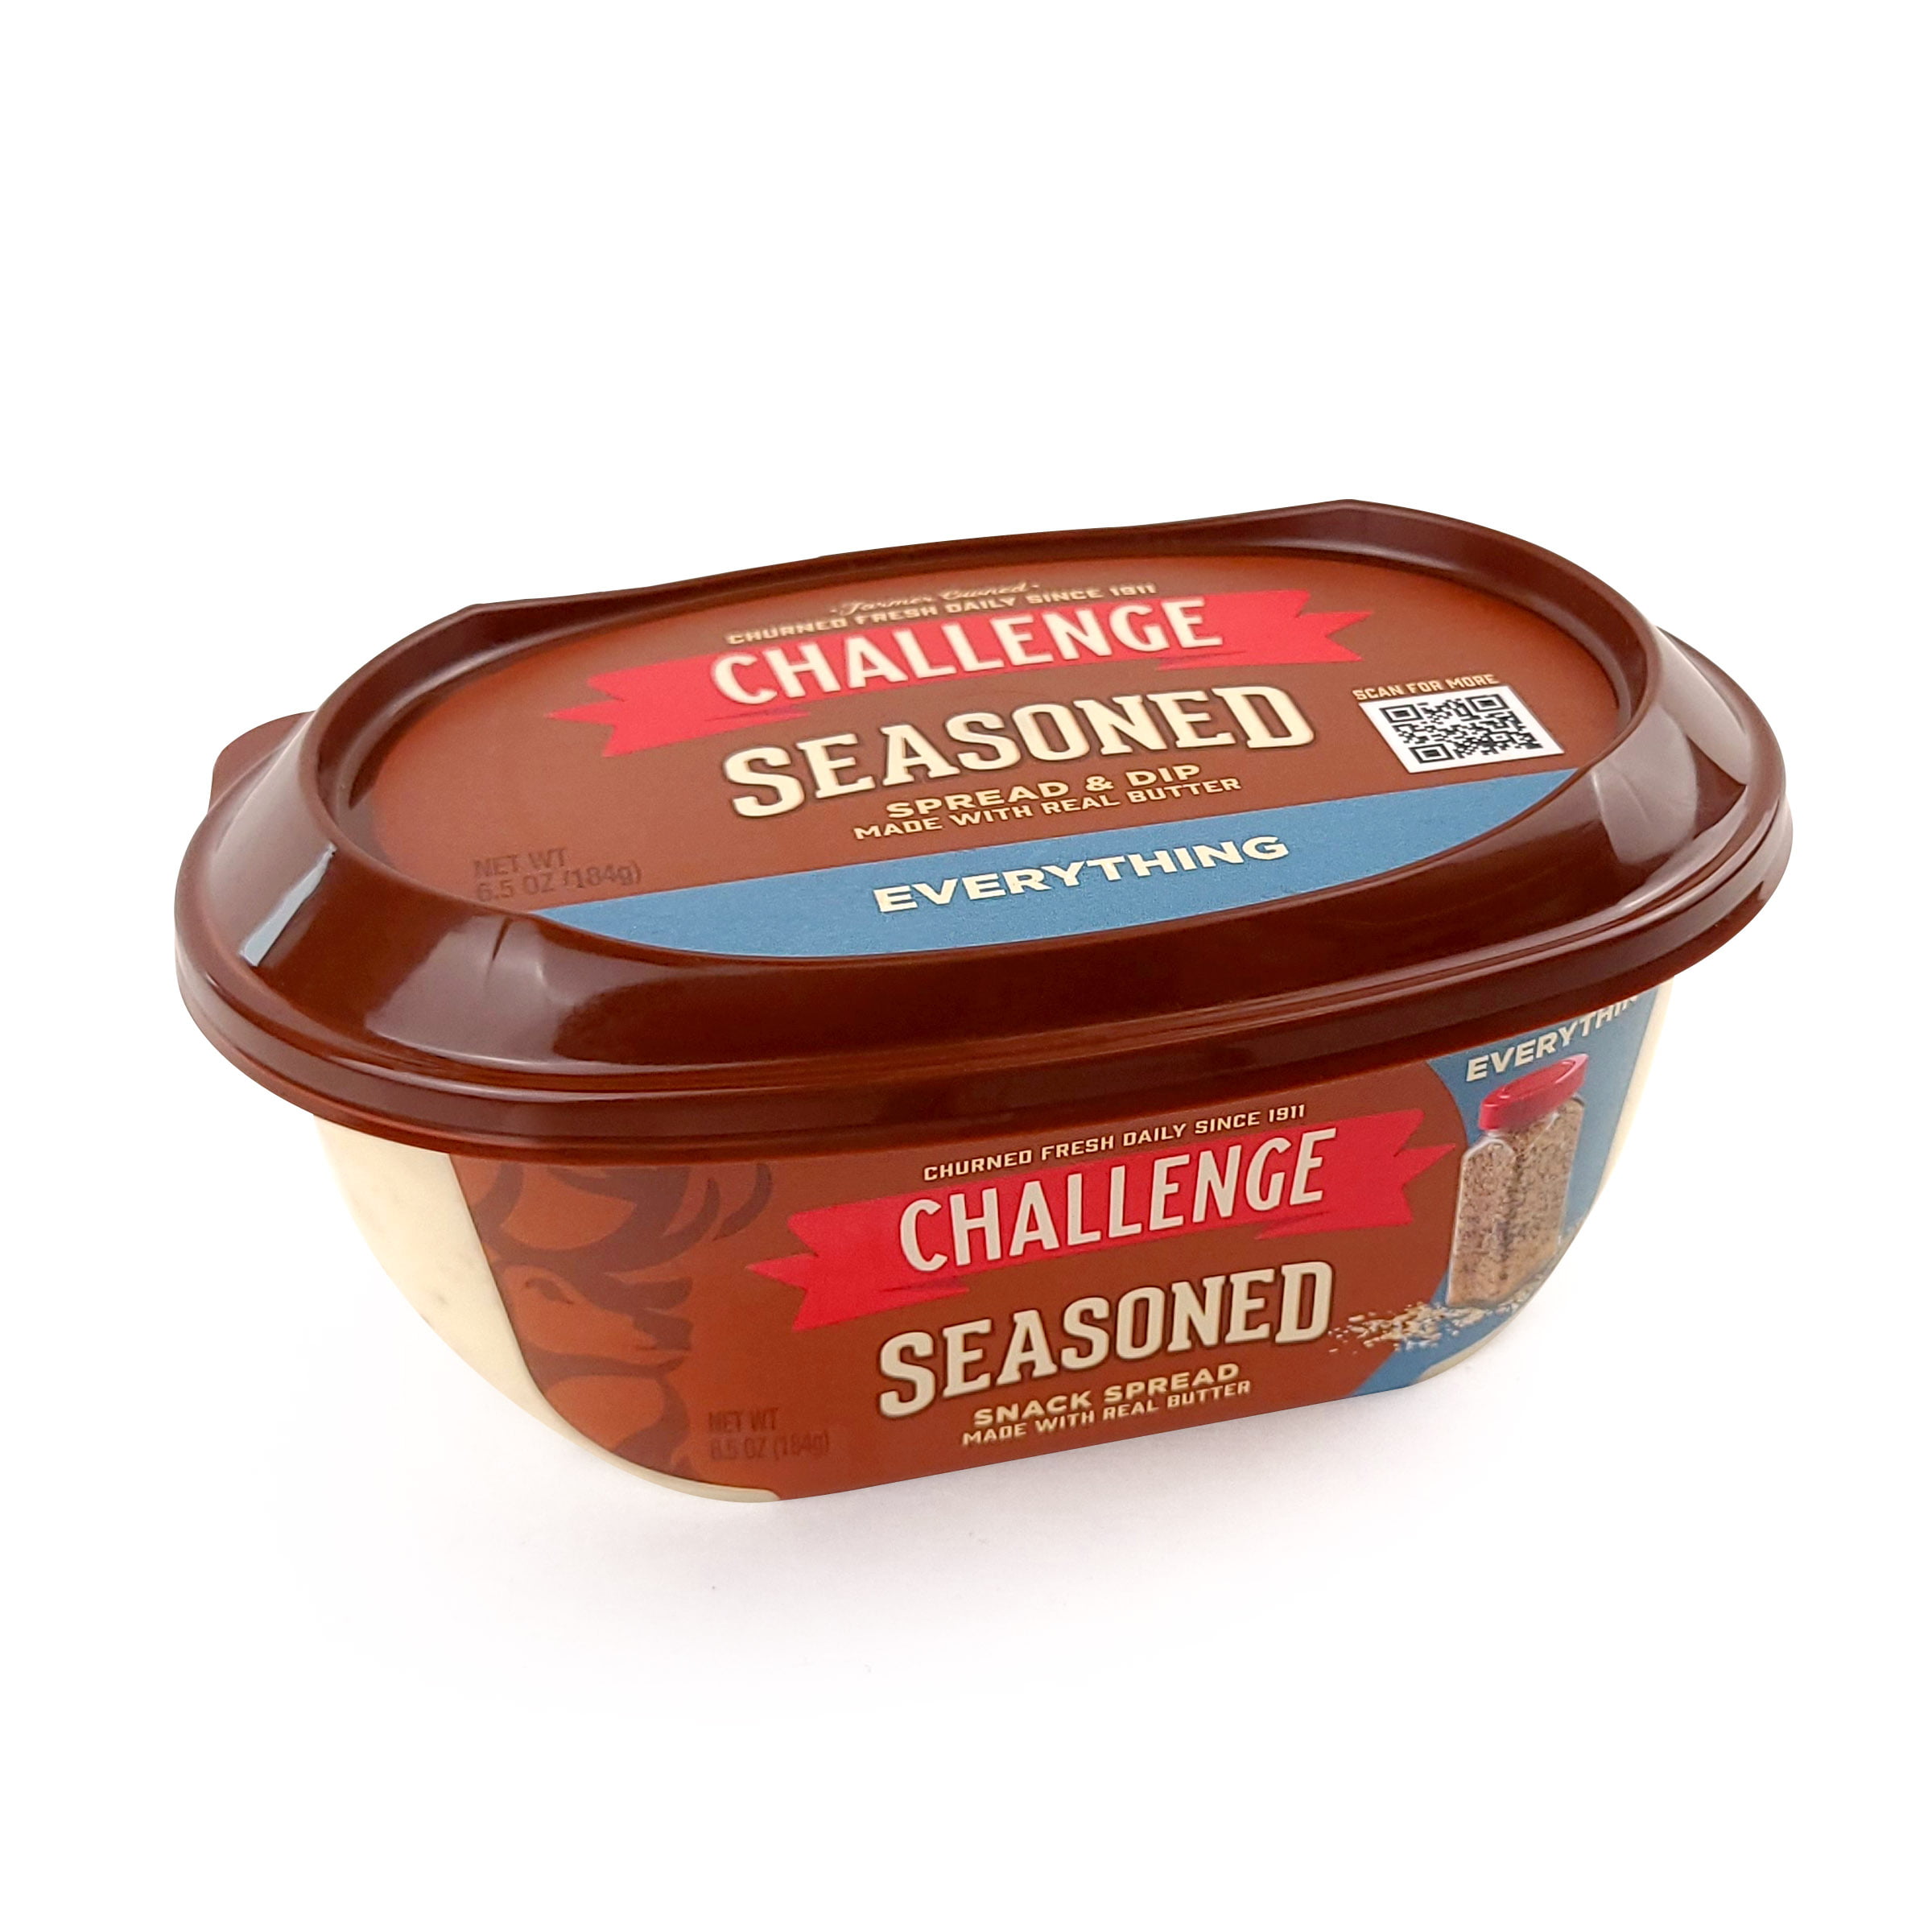 Challenge Butter, Lawry's Debut New 'Snack Spread